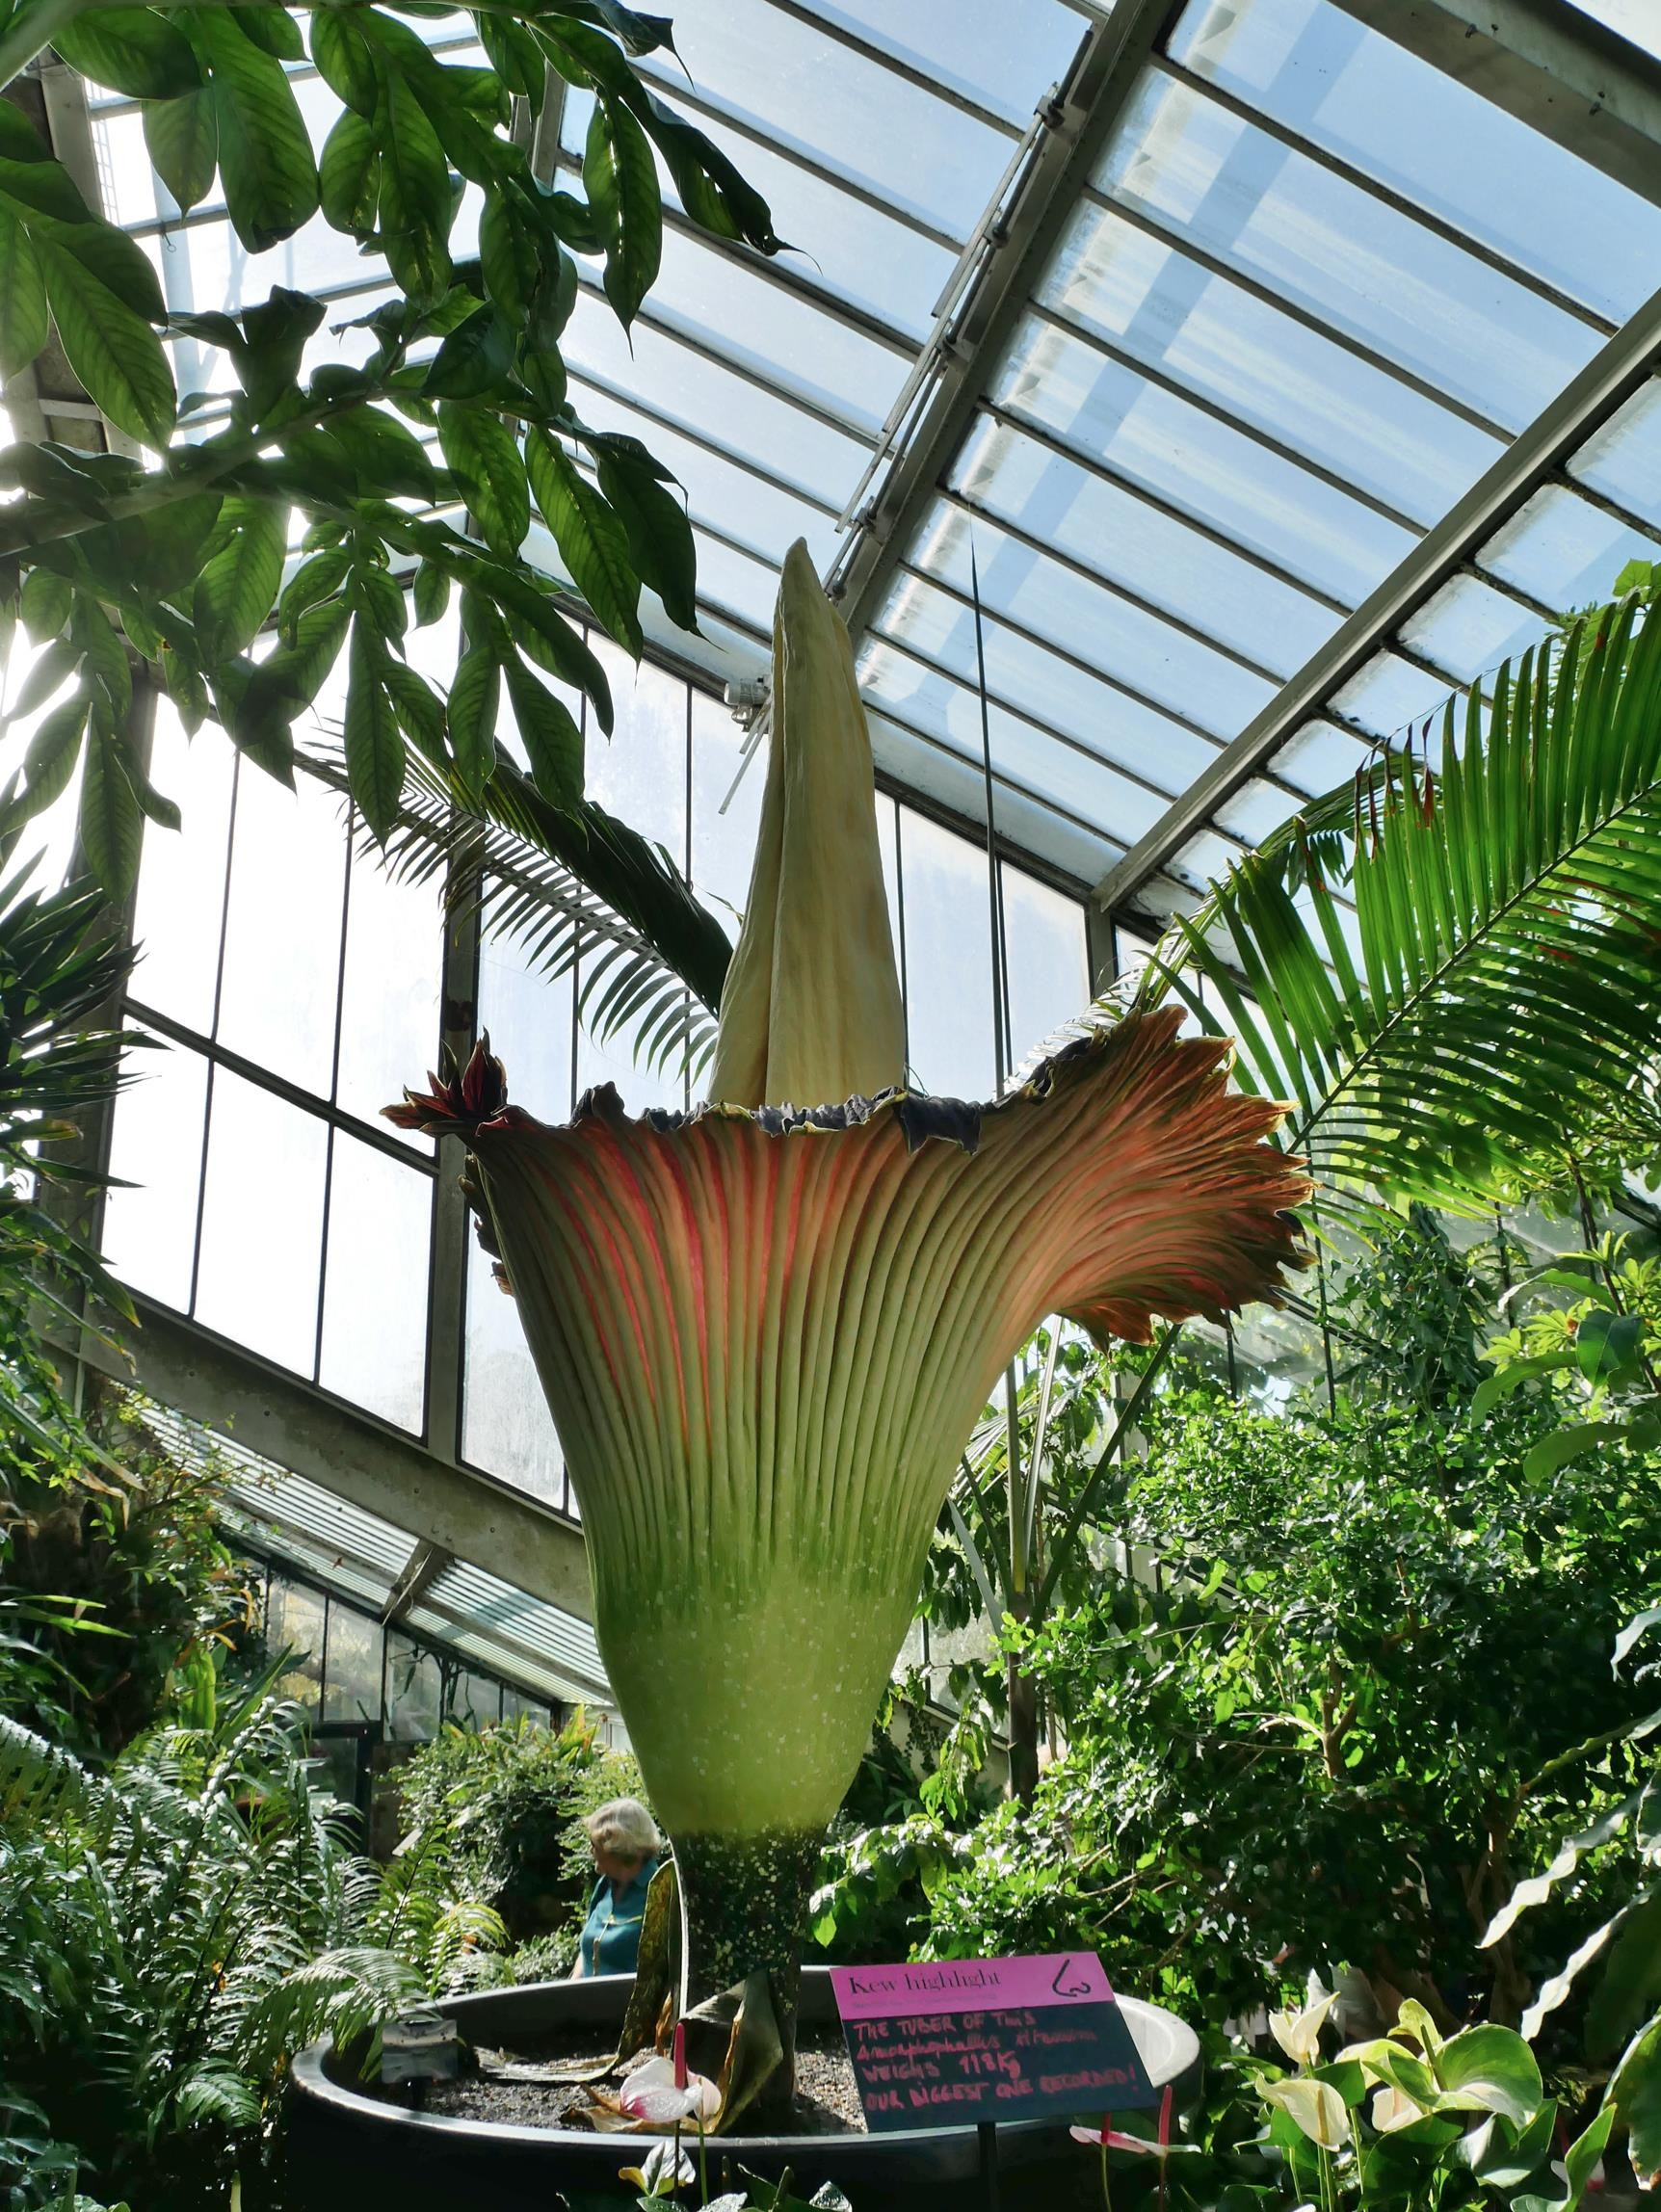 A rare chance to see Amorphophallus titanum (the corpse flower) in flower at Kew Gardens